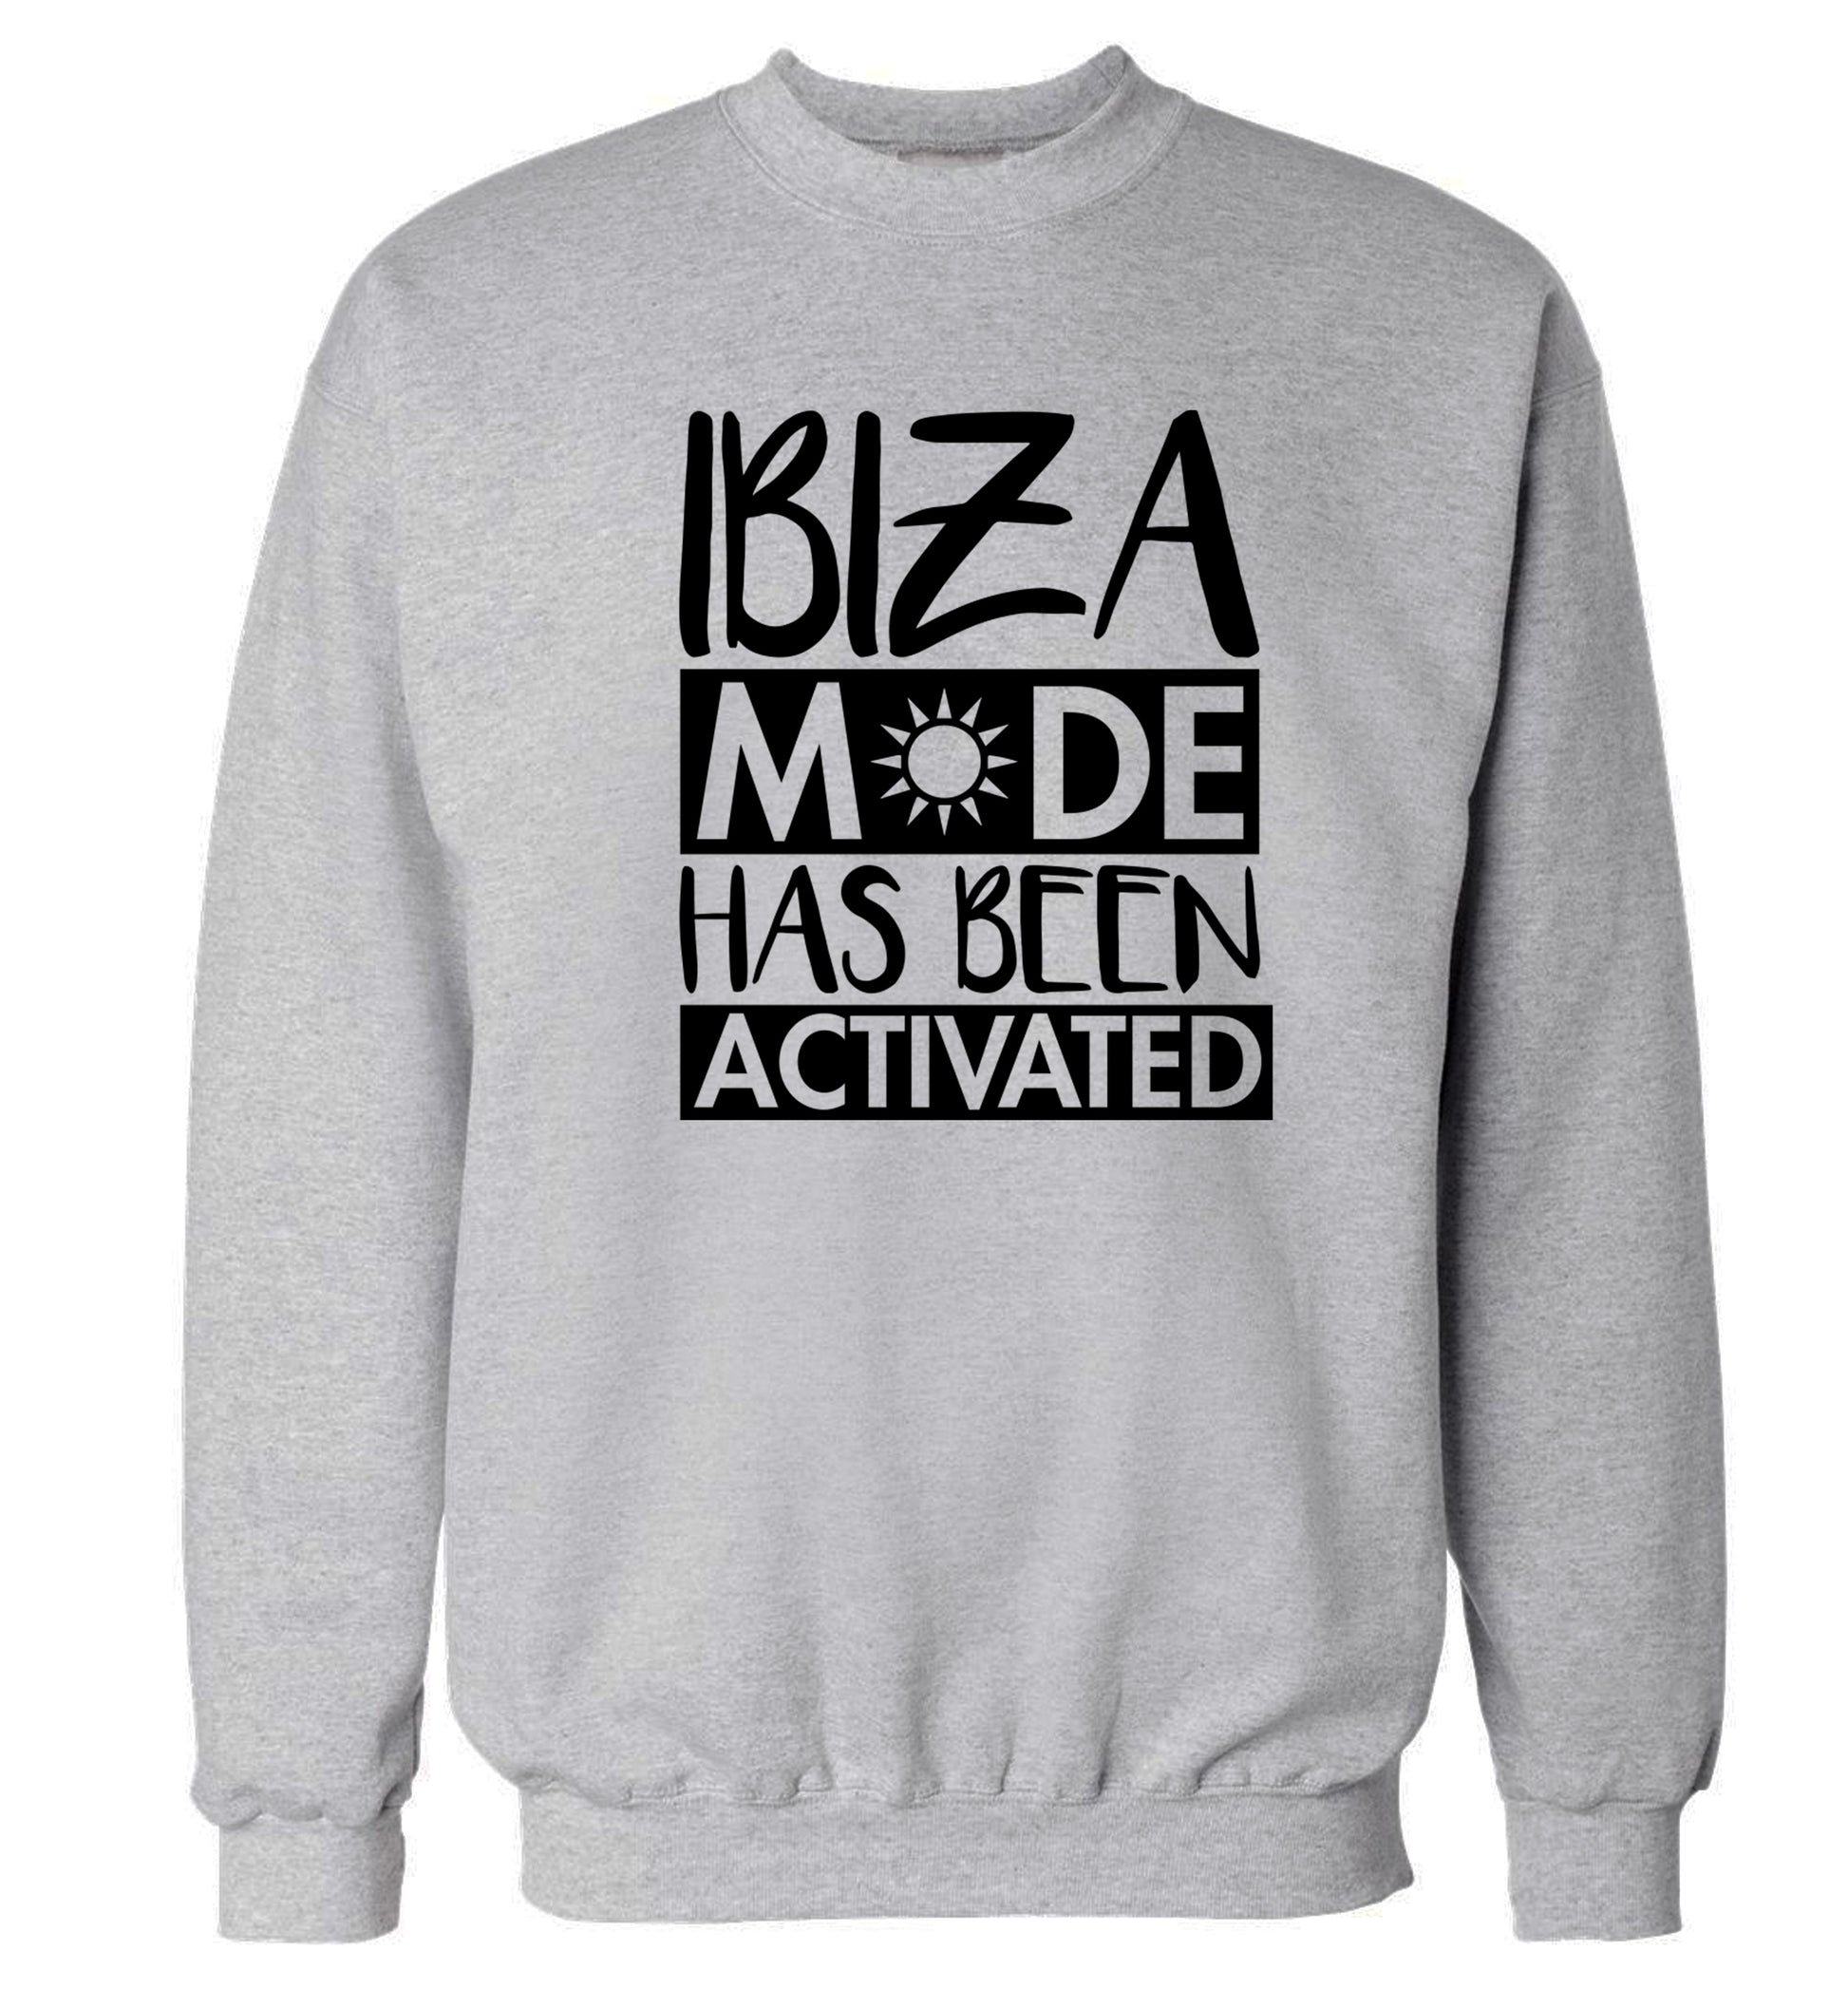 Ibiza mode has been activated Adult's unisex grey Sweater 2XL